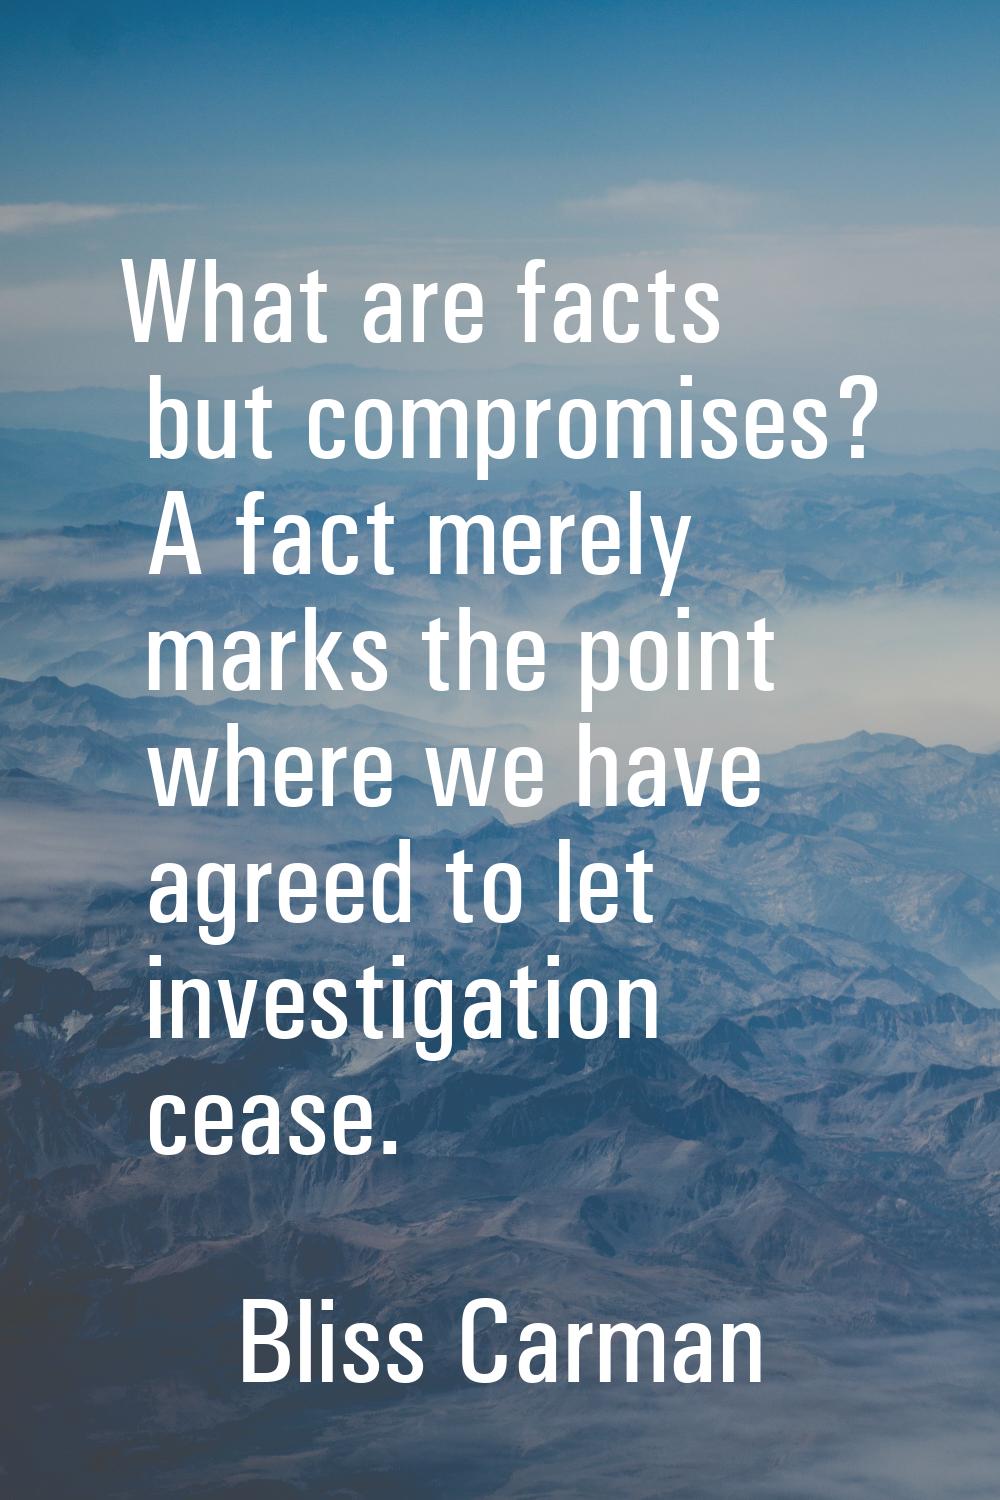 What are facts but compromises? A fact merely marks the point where we have agreed to let investiga